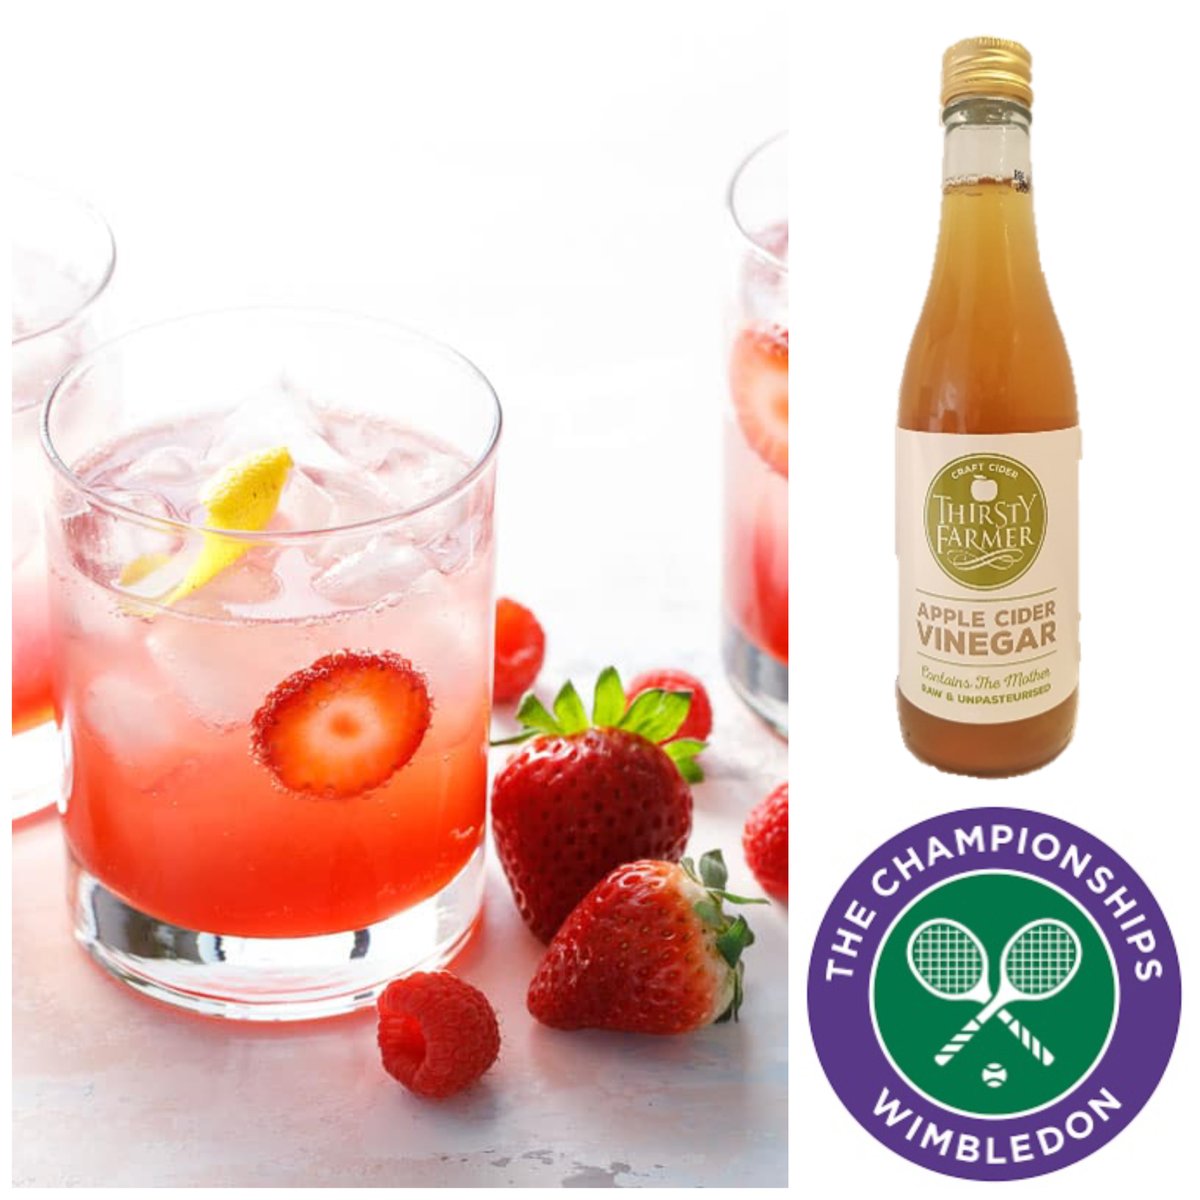 Try our strawberry ACV drink, which is deliciously zesty, inspired by #Wimbledon Fill a glass with ice, fresh berries and sparkling water. Mix in some lemon juice and Thirsty Farmers ACV Serve with strawberries, basil and mint For a delicious touch, add some vanilla ice cream!